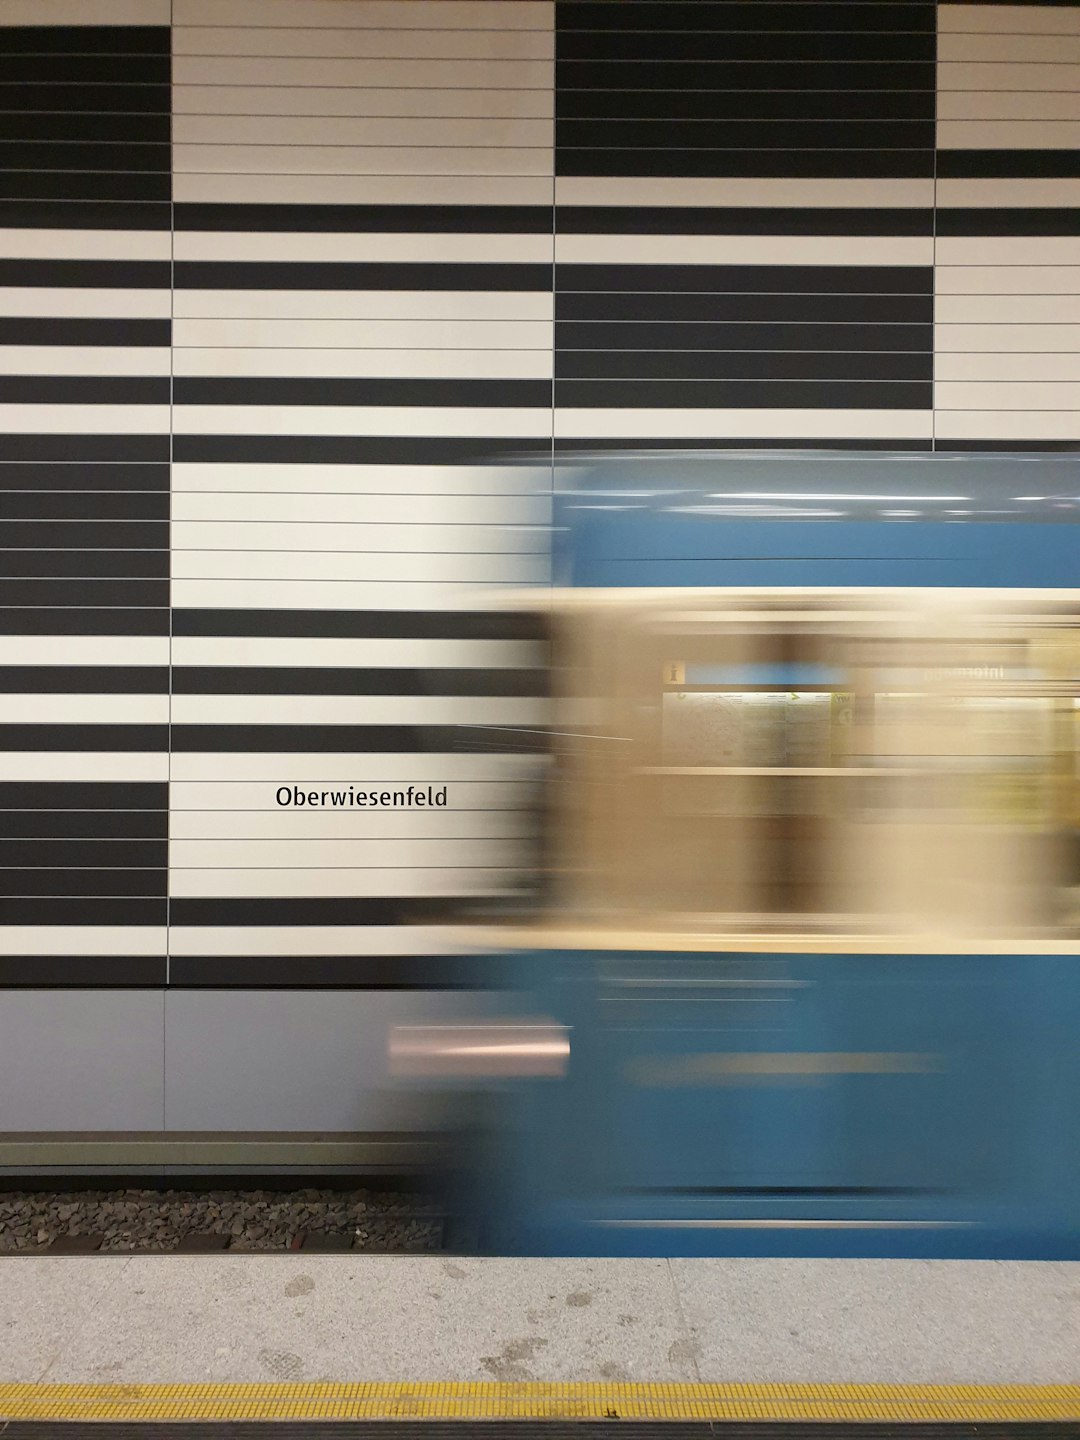 blue and white train in train station